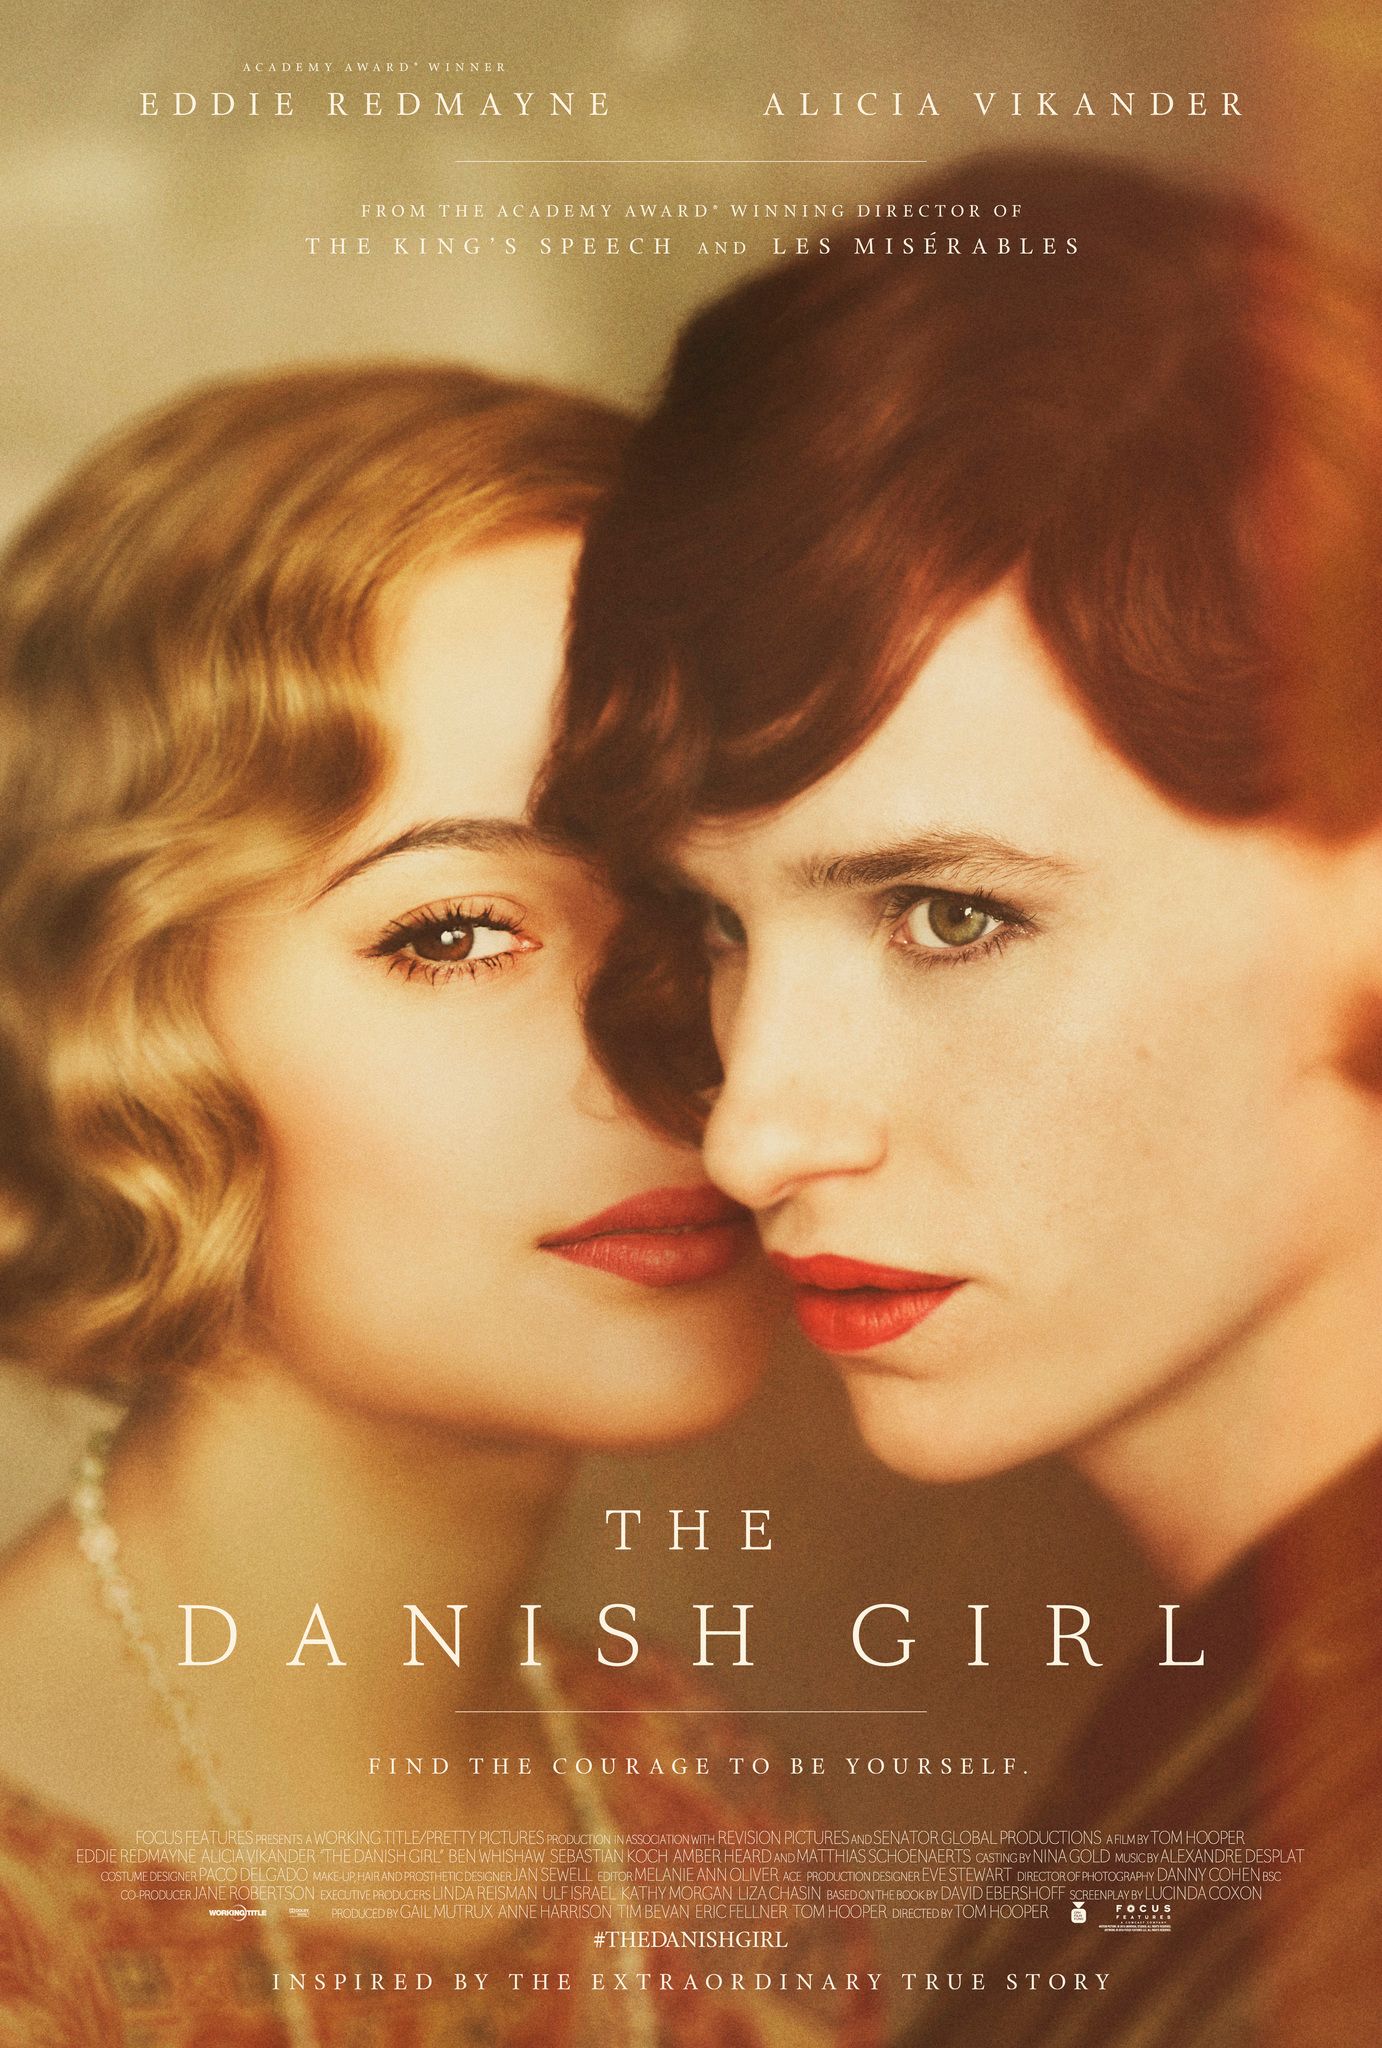 Alicia Vikander and Eddie Redmayne on the cover of The Danish Girl